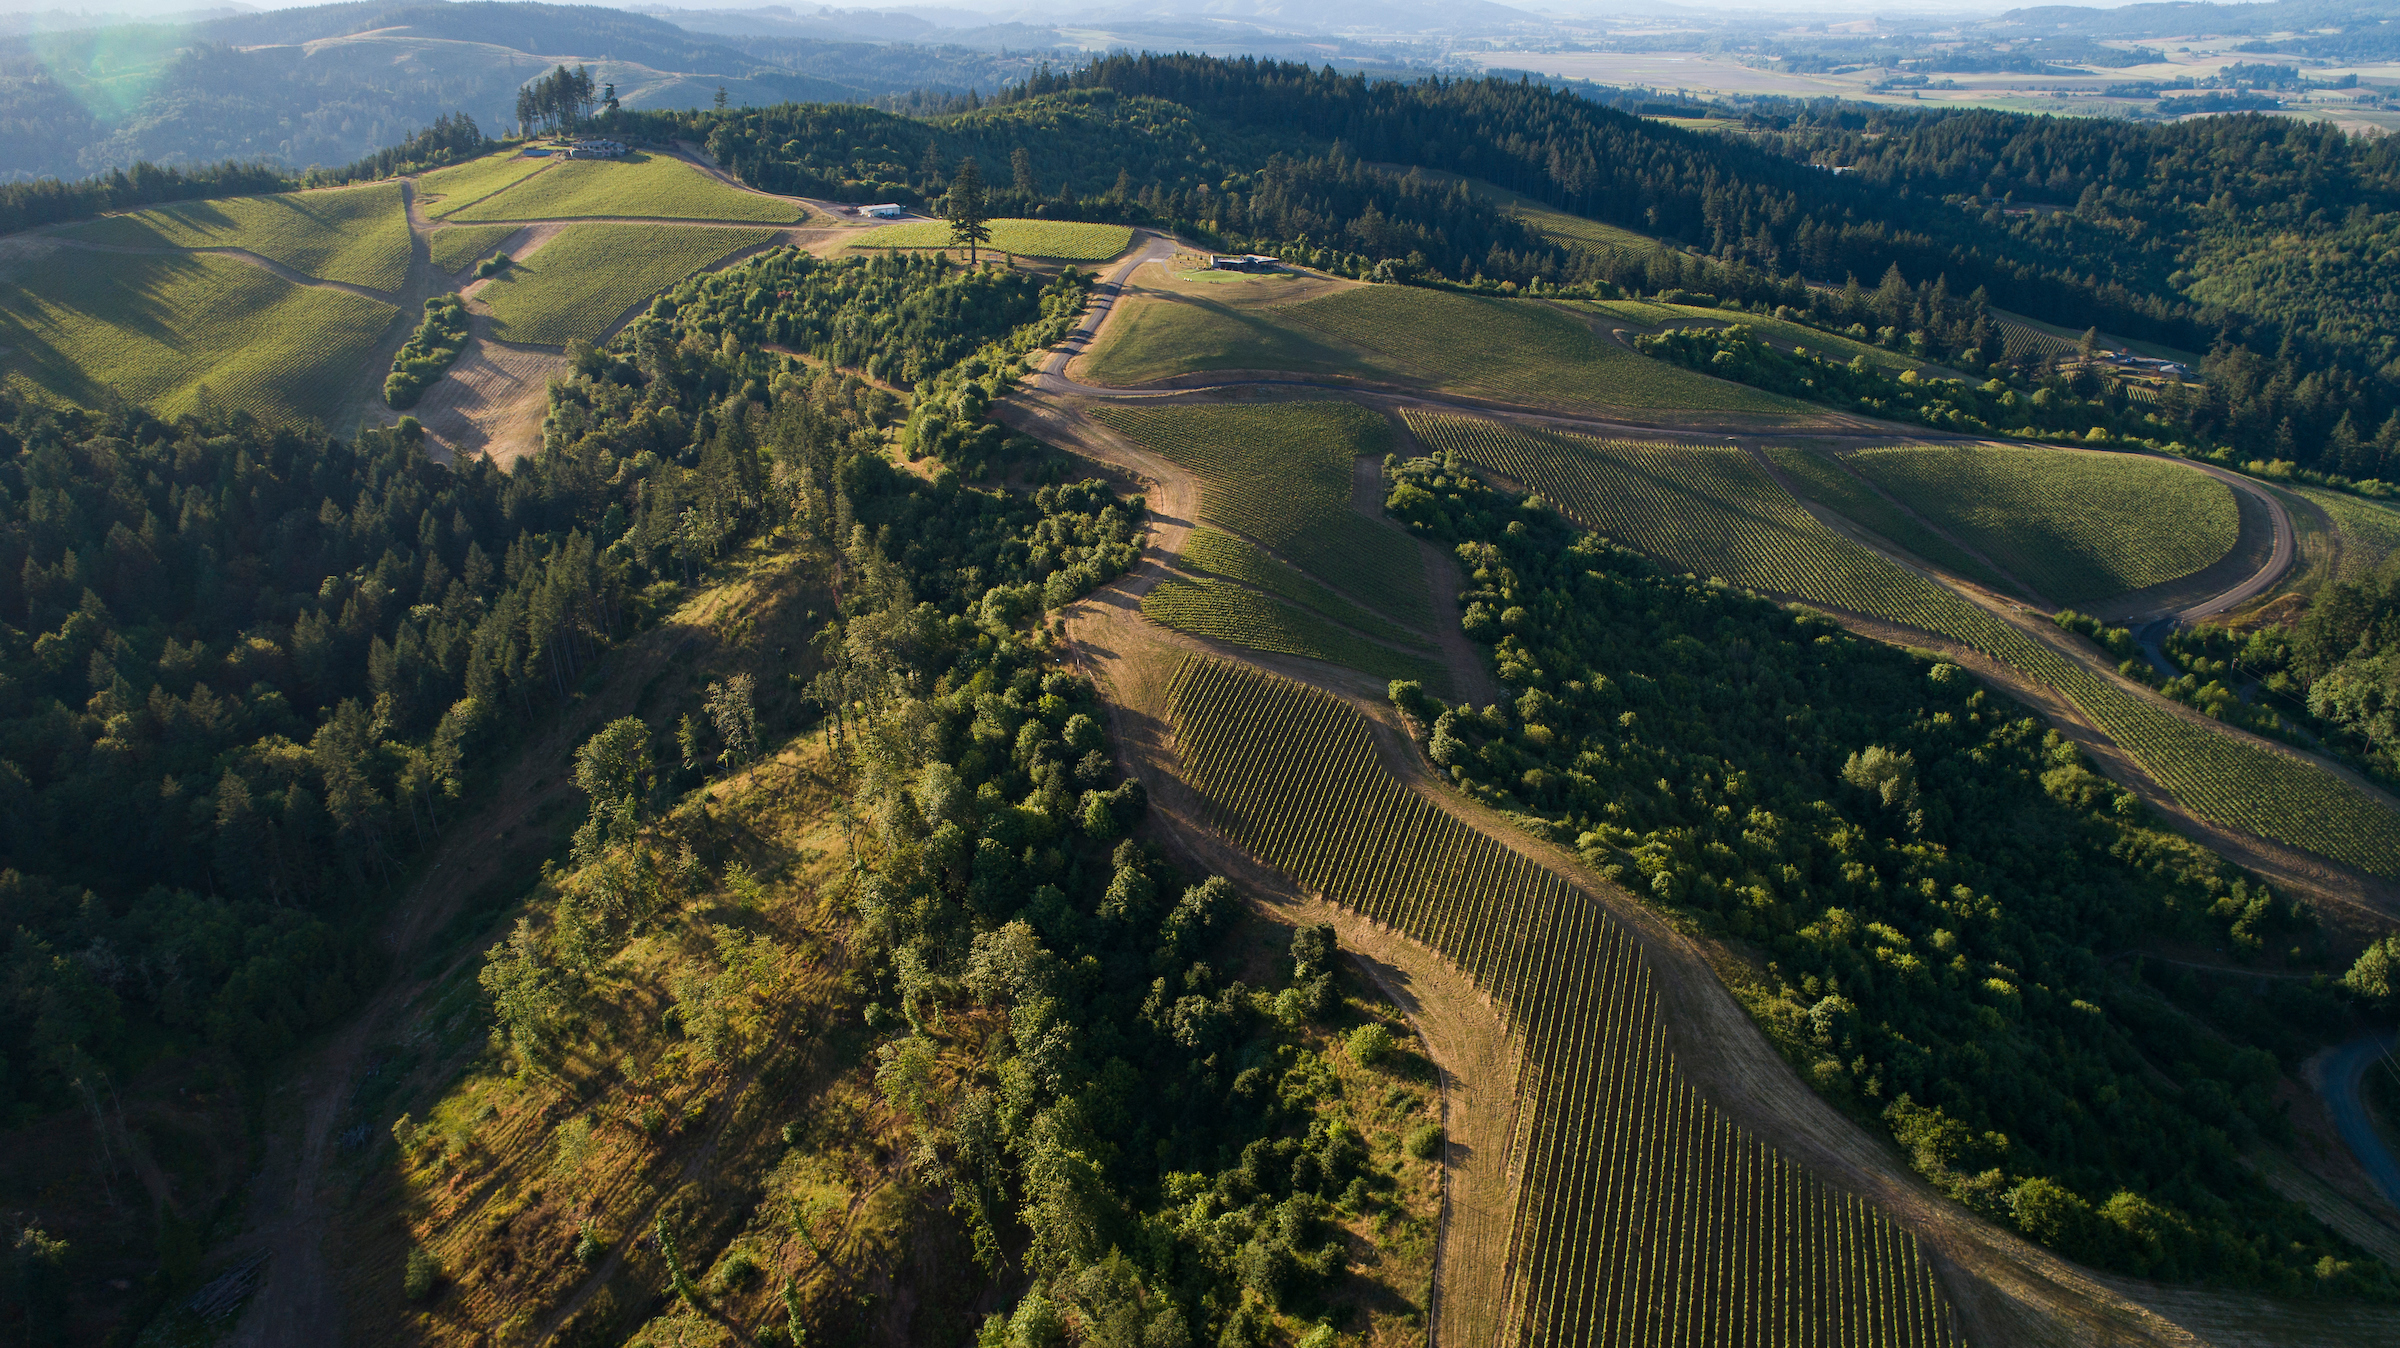 The vines and forest of Fairsing Vineyard as seen from above